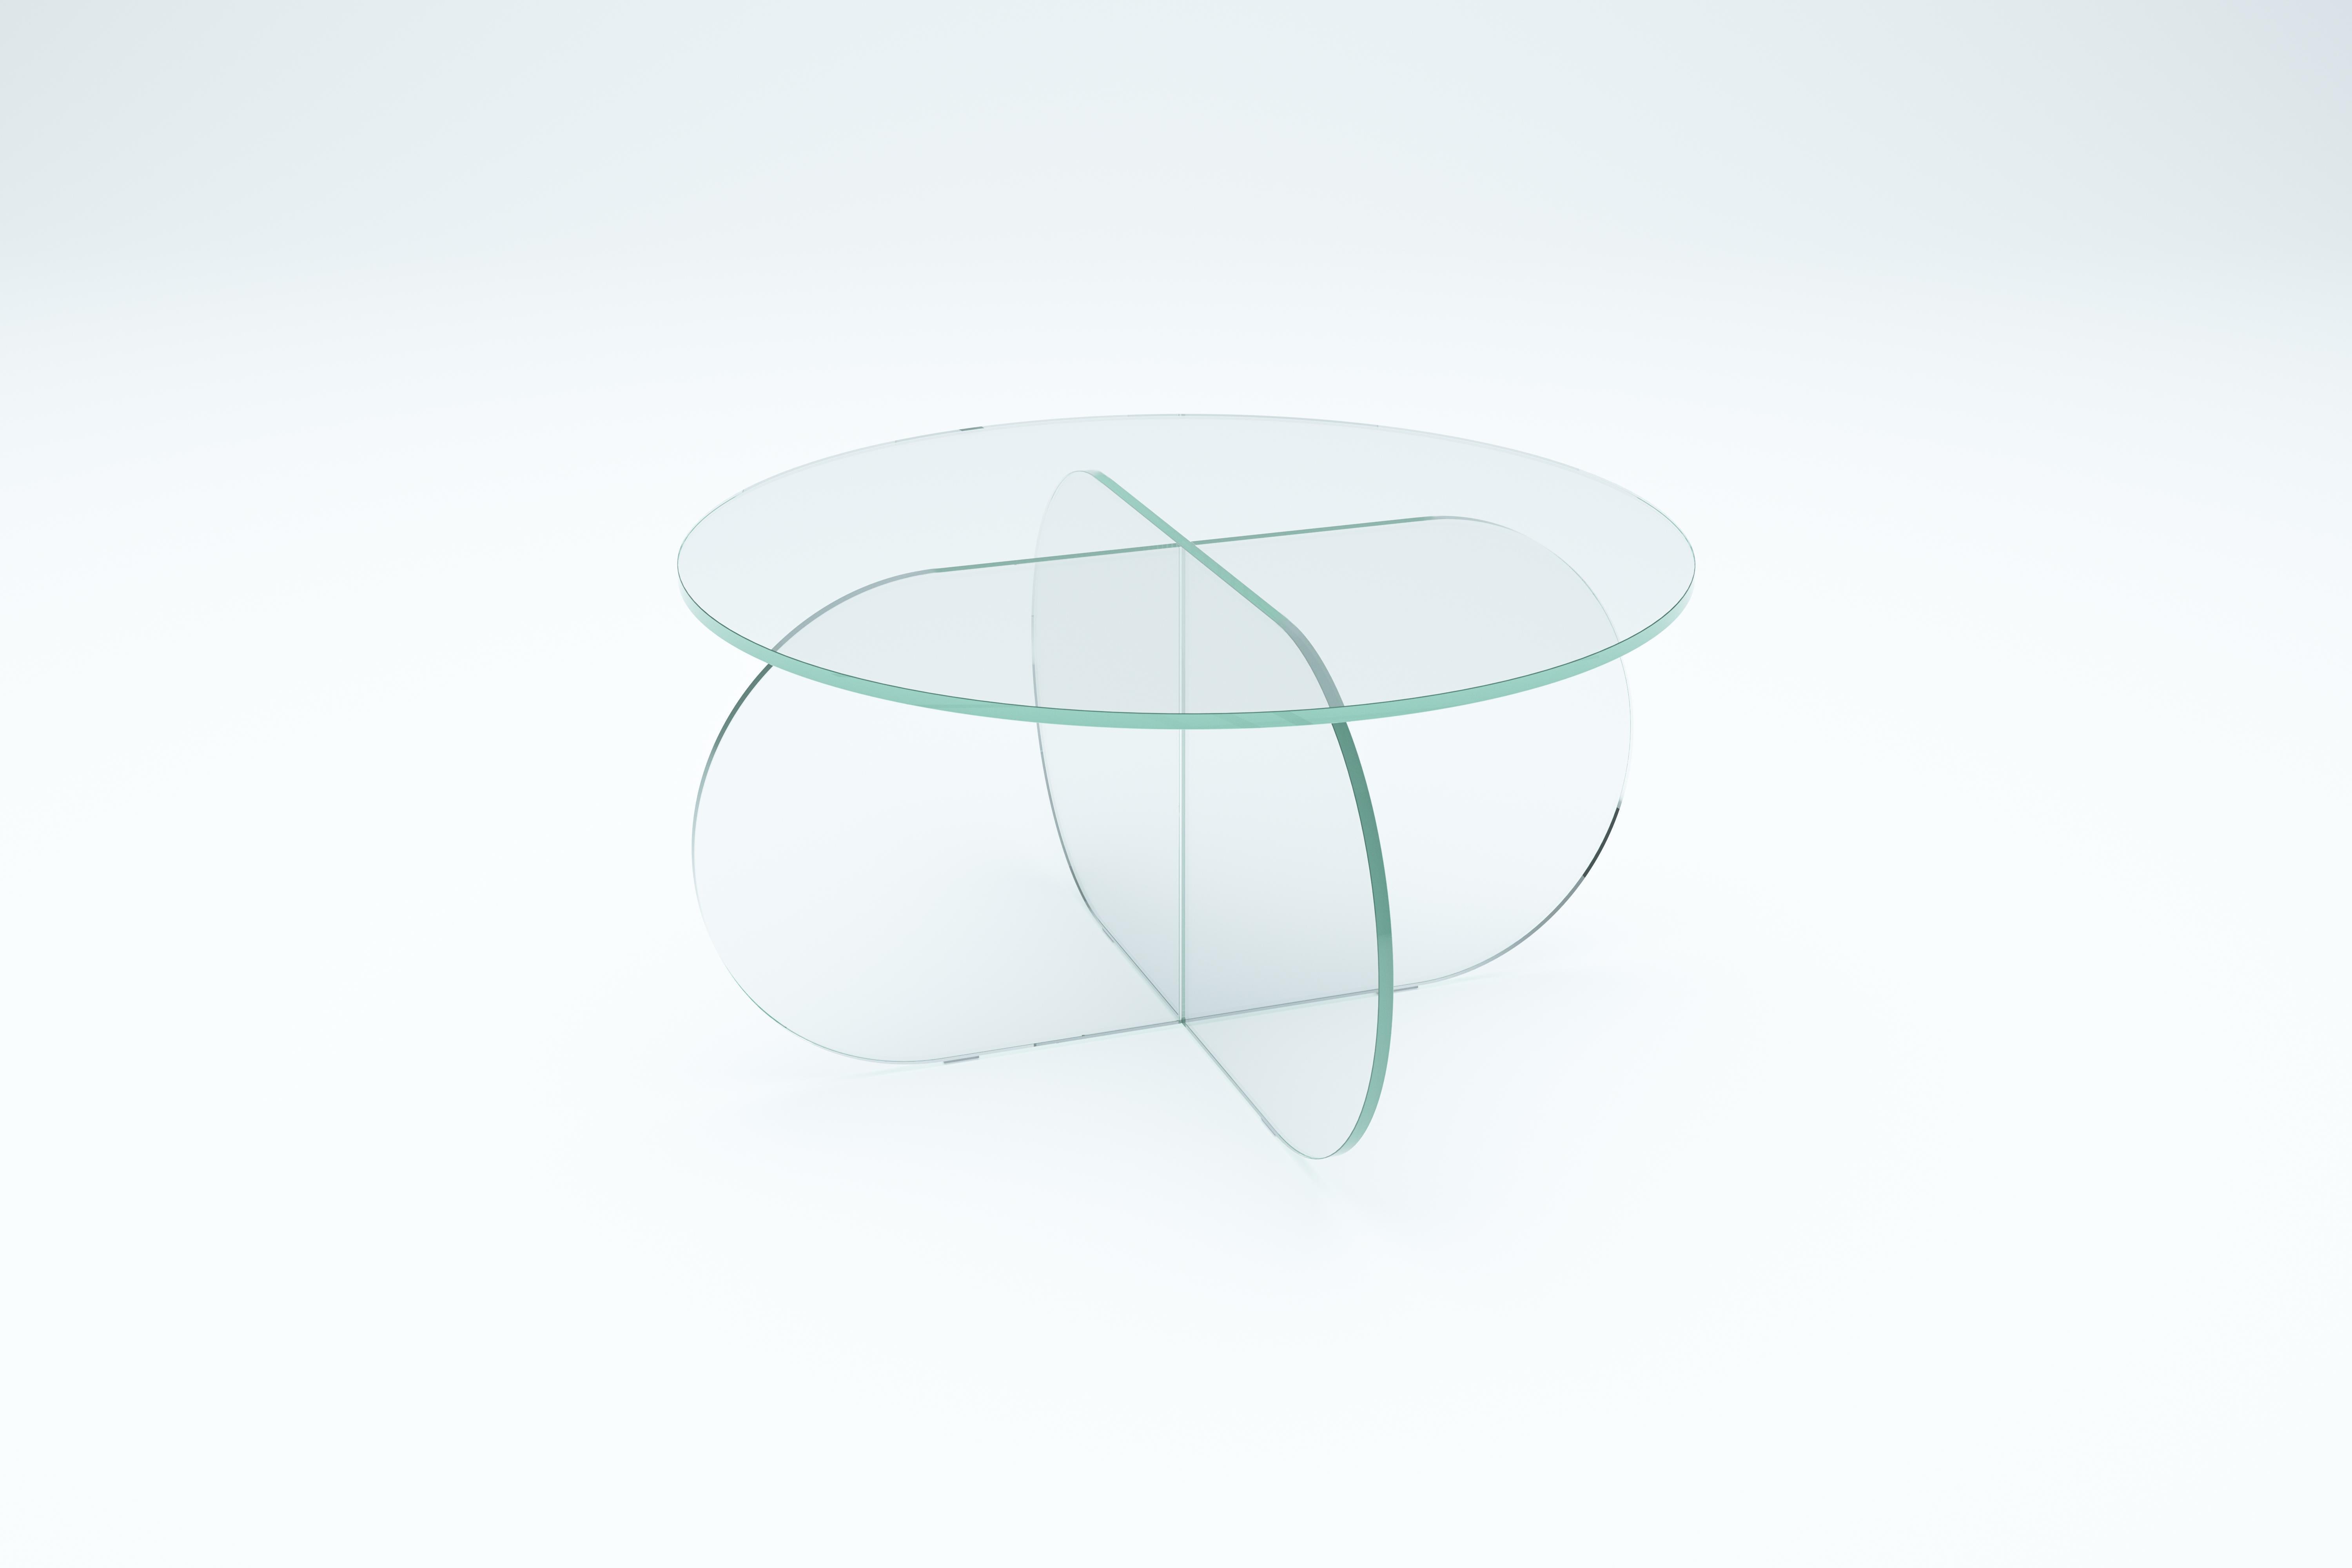 Nor Circle 70 Satin Glass, Sebastian Scherer
Dimensions: ø 70 x 35 cm
Materials: Satin Glass


The NEO/CRAFT label was founded by the Berlin-based designer Sebastian Scherer after he won the Lexus Design Award 2014 for his Iris lamp (2013). The